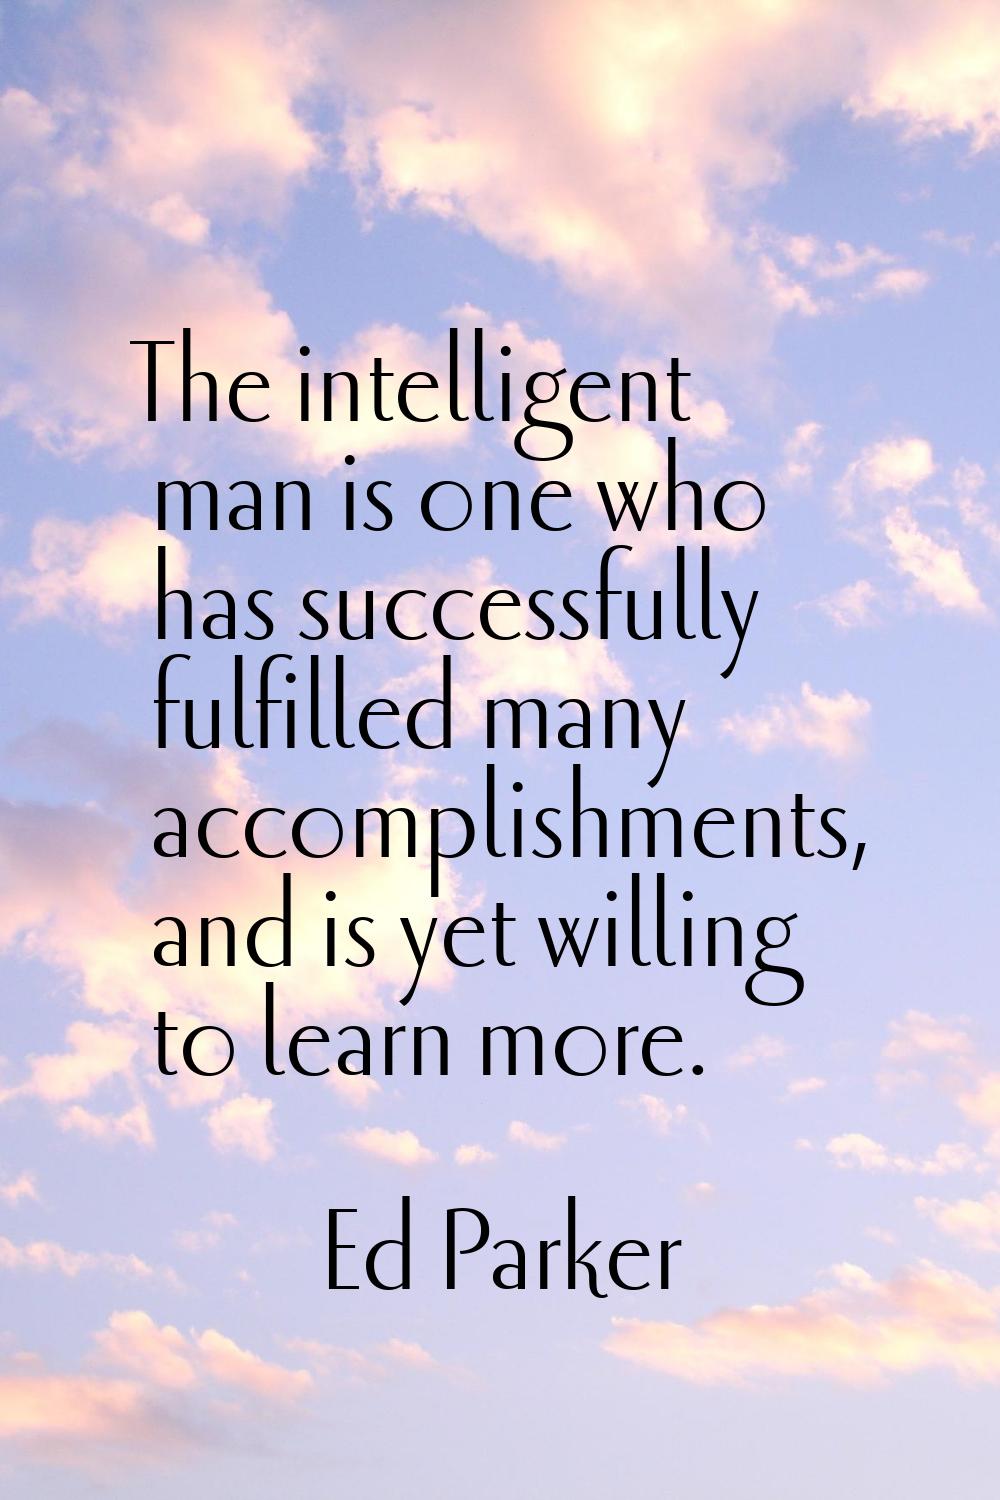 The intelligent man is one who has successfully fulfilled many accomplishments, and is yet willing 